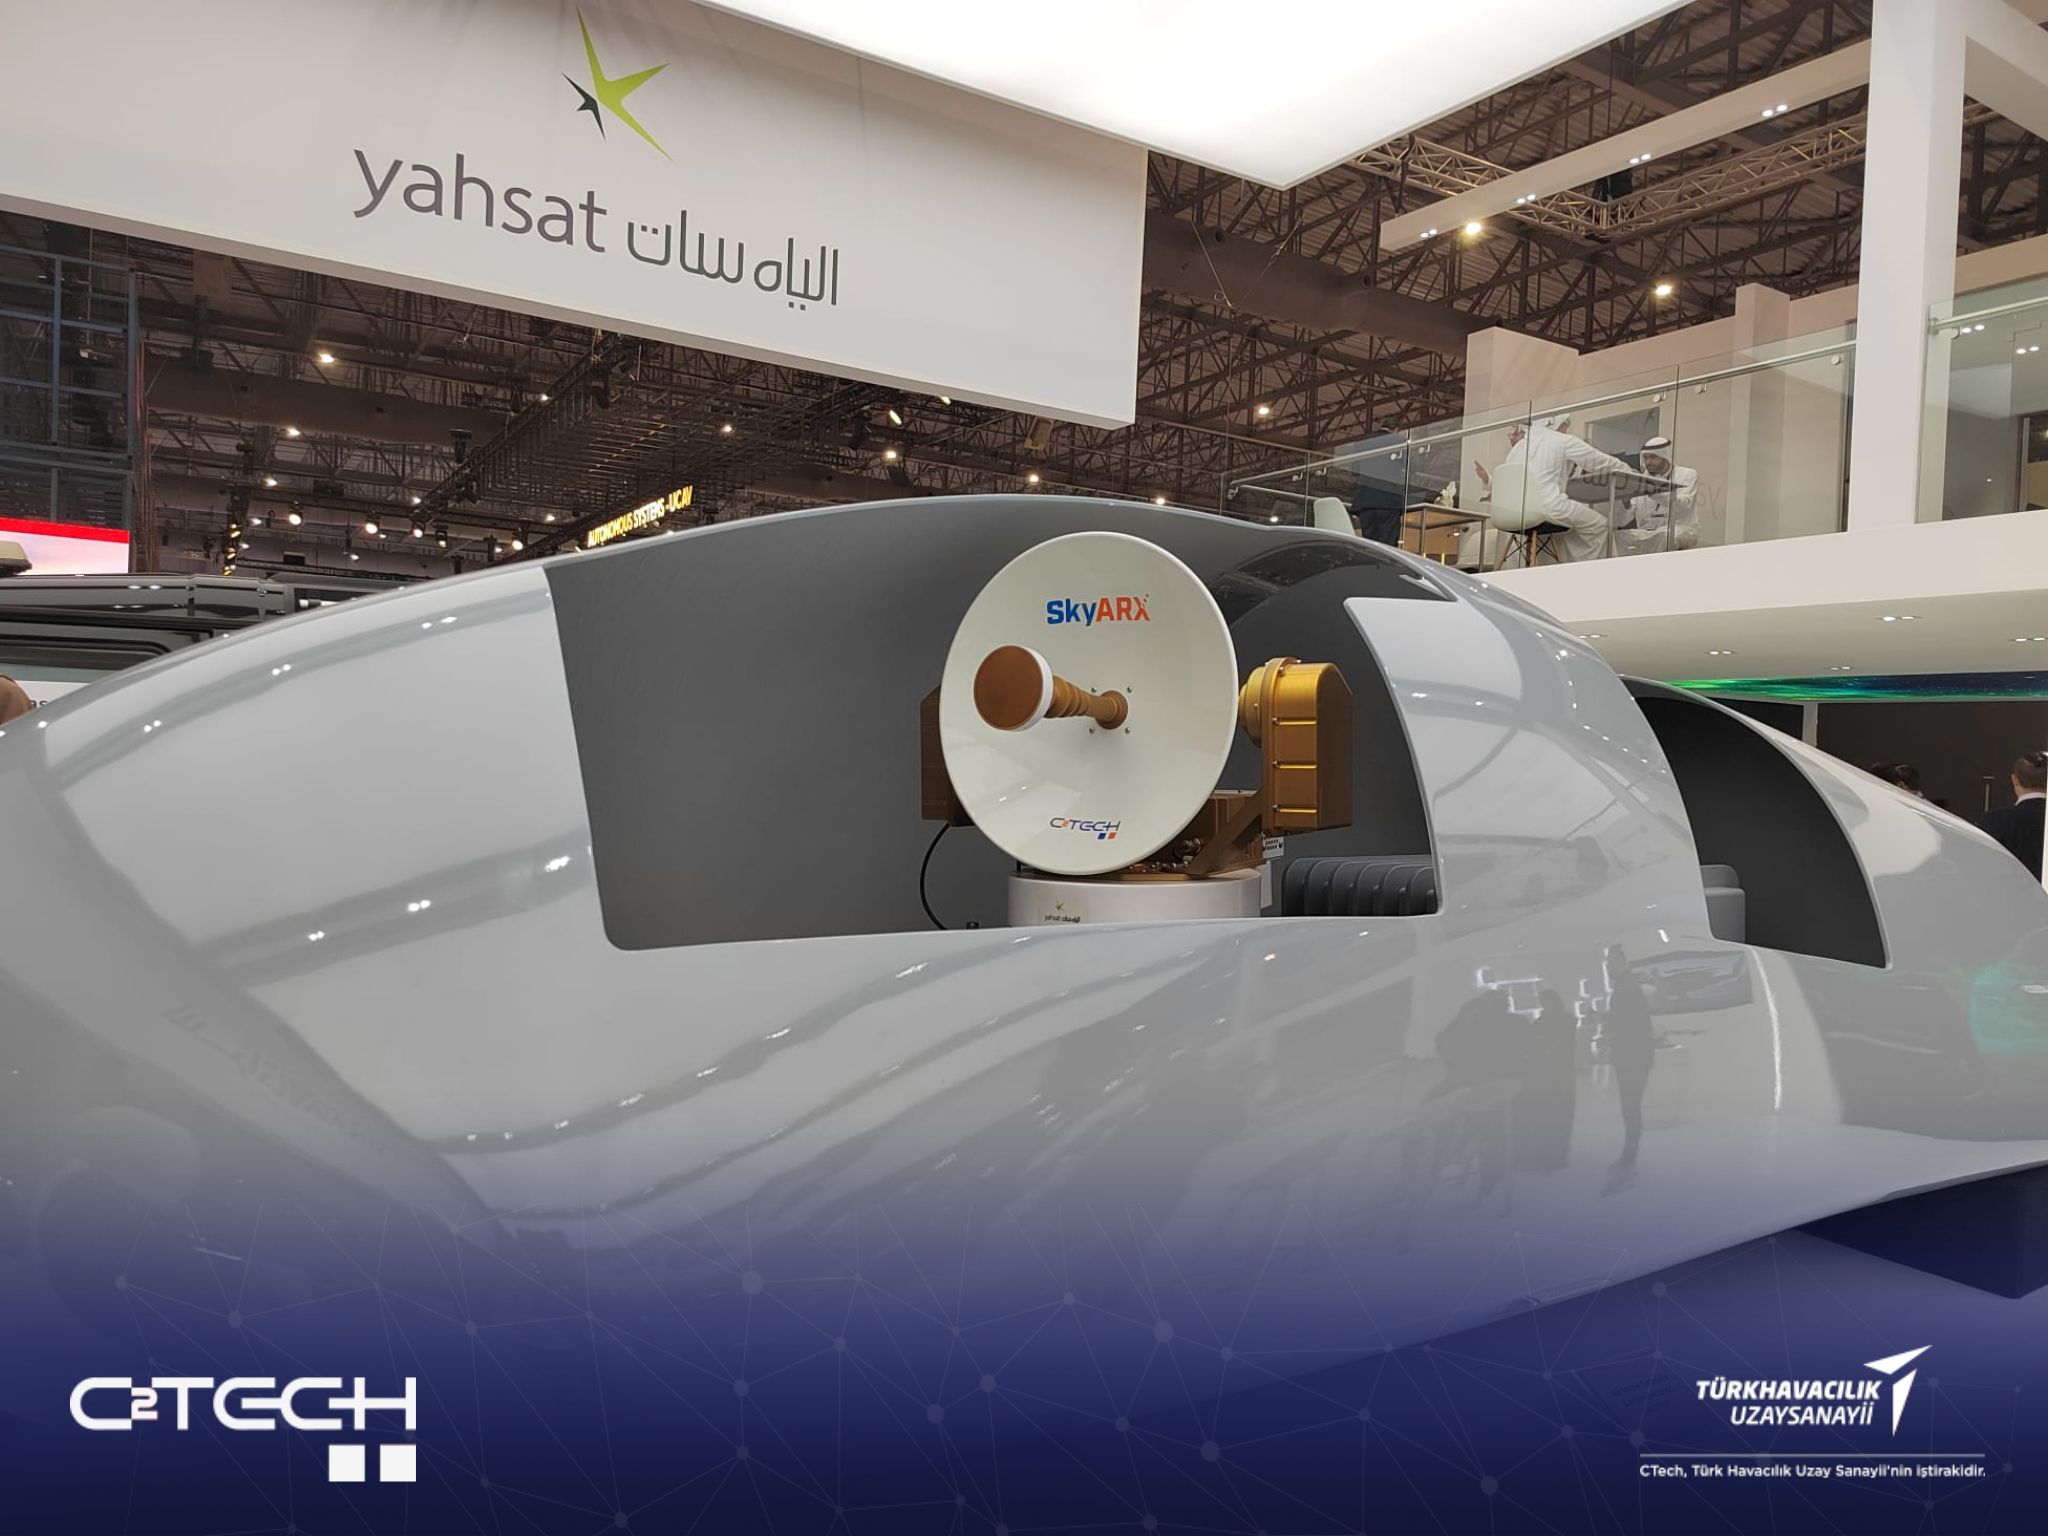 CTech | CTech Information Technologies Participated in the International Aviation and Space Fair Dubai Airshow held in the United Arab Emirates between 13 – 17 November.